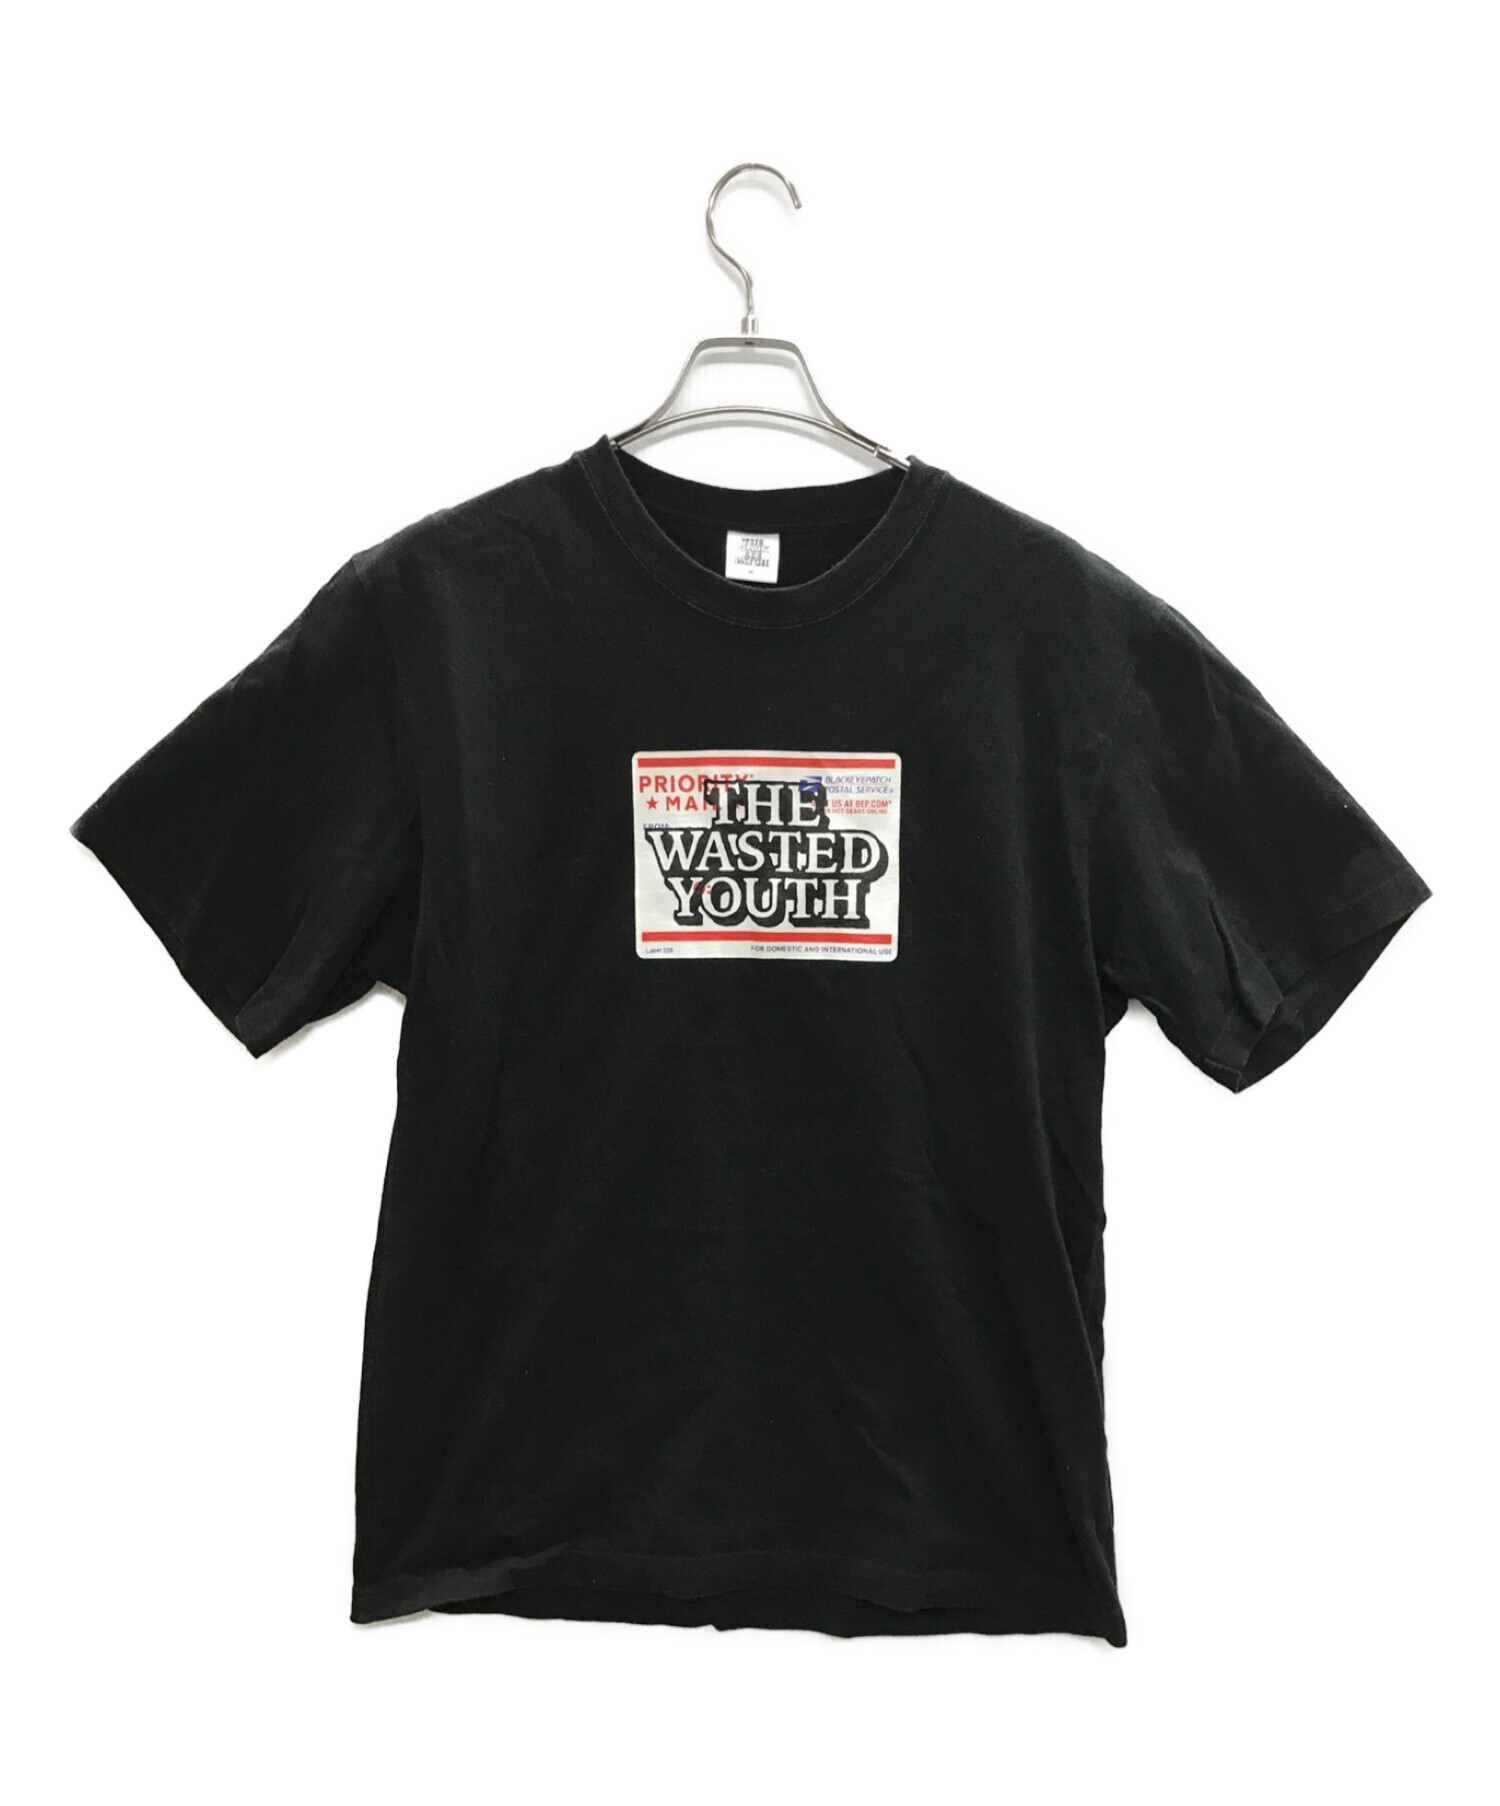 wasted youth black eye patch Tシャツ Mトップス